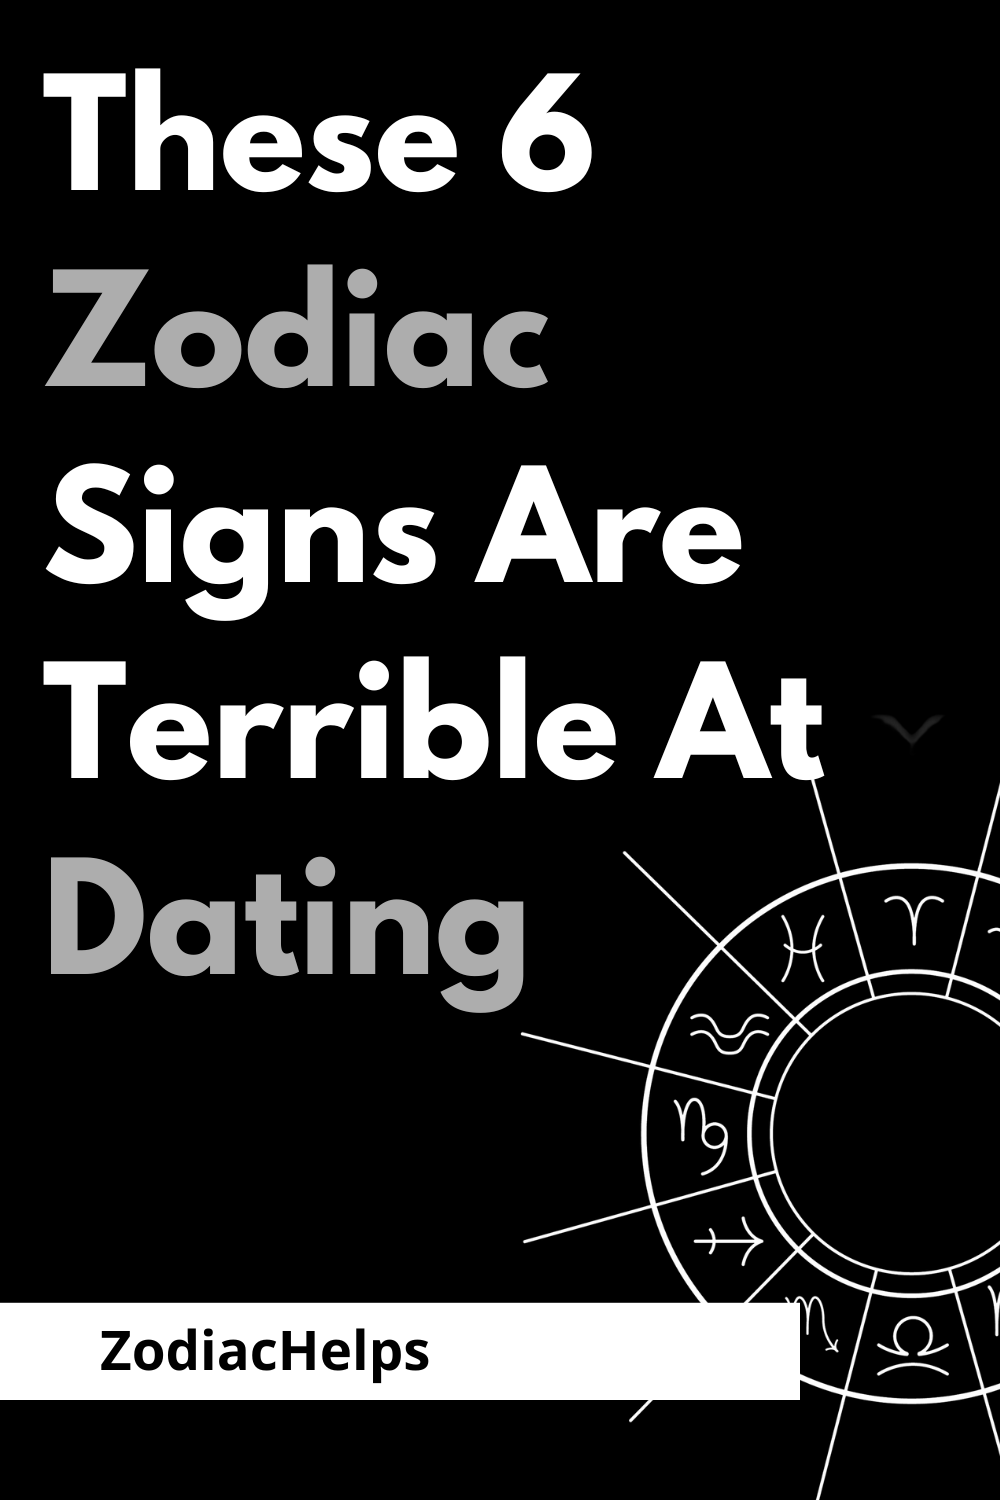 These 6 Zodiac Signs Are Terrible At Dating